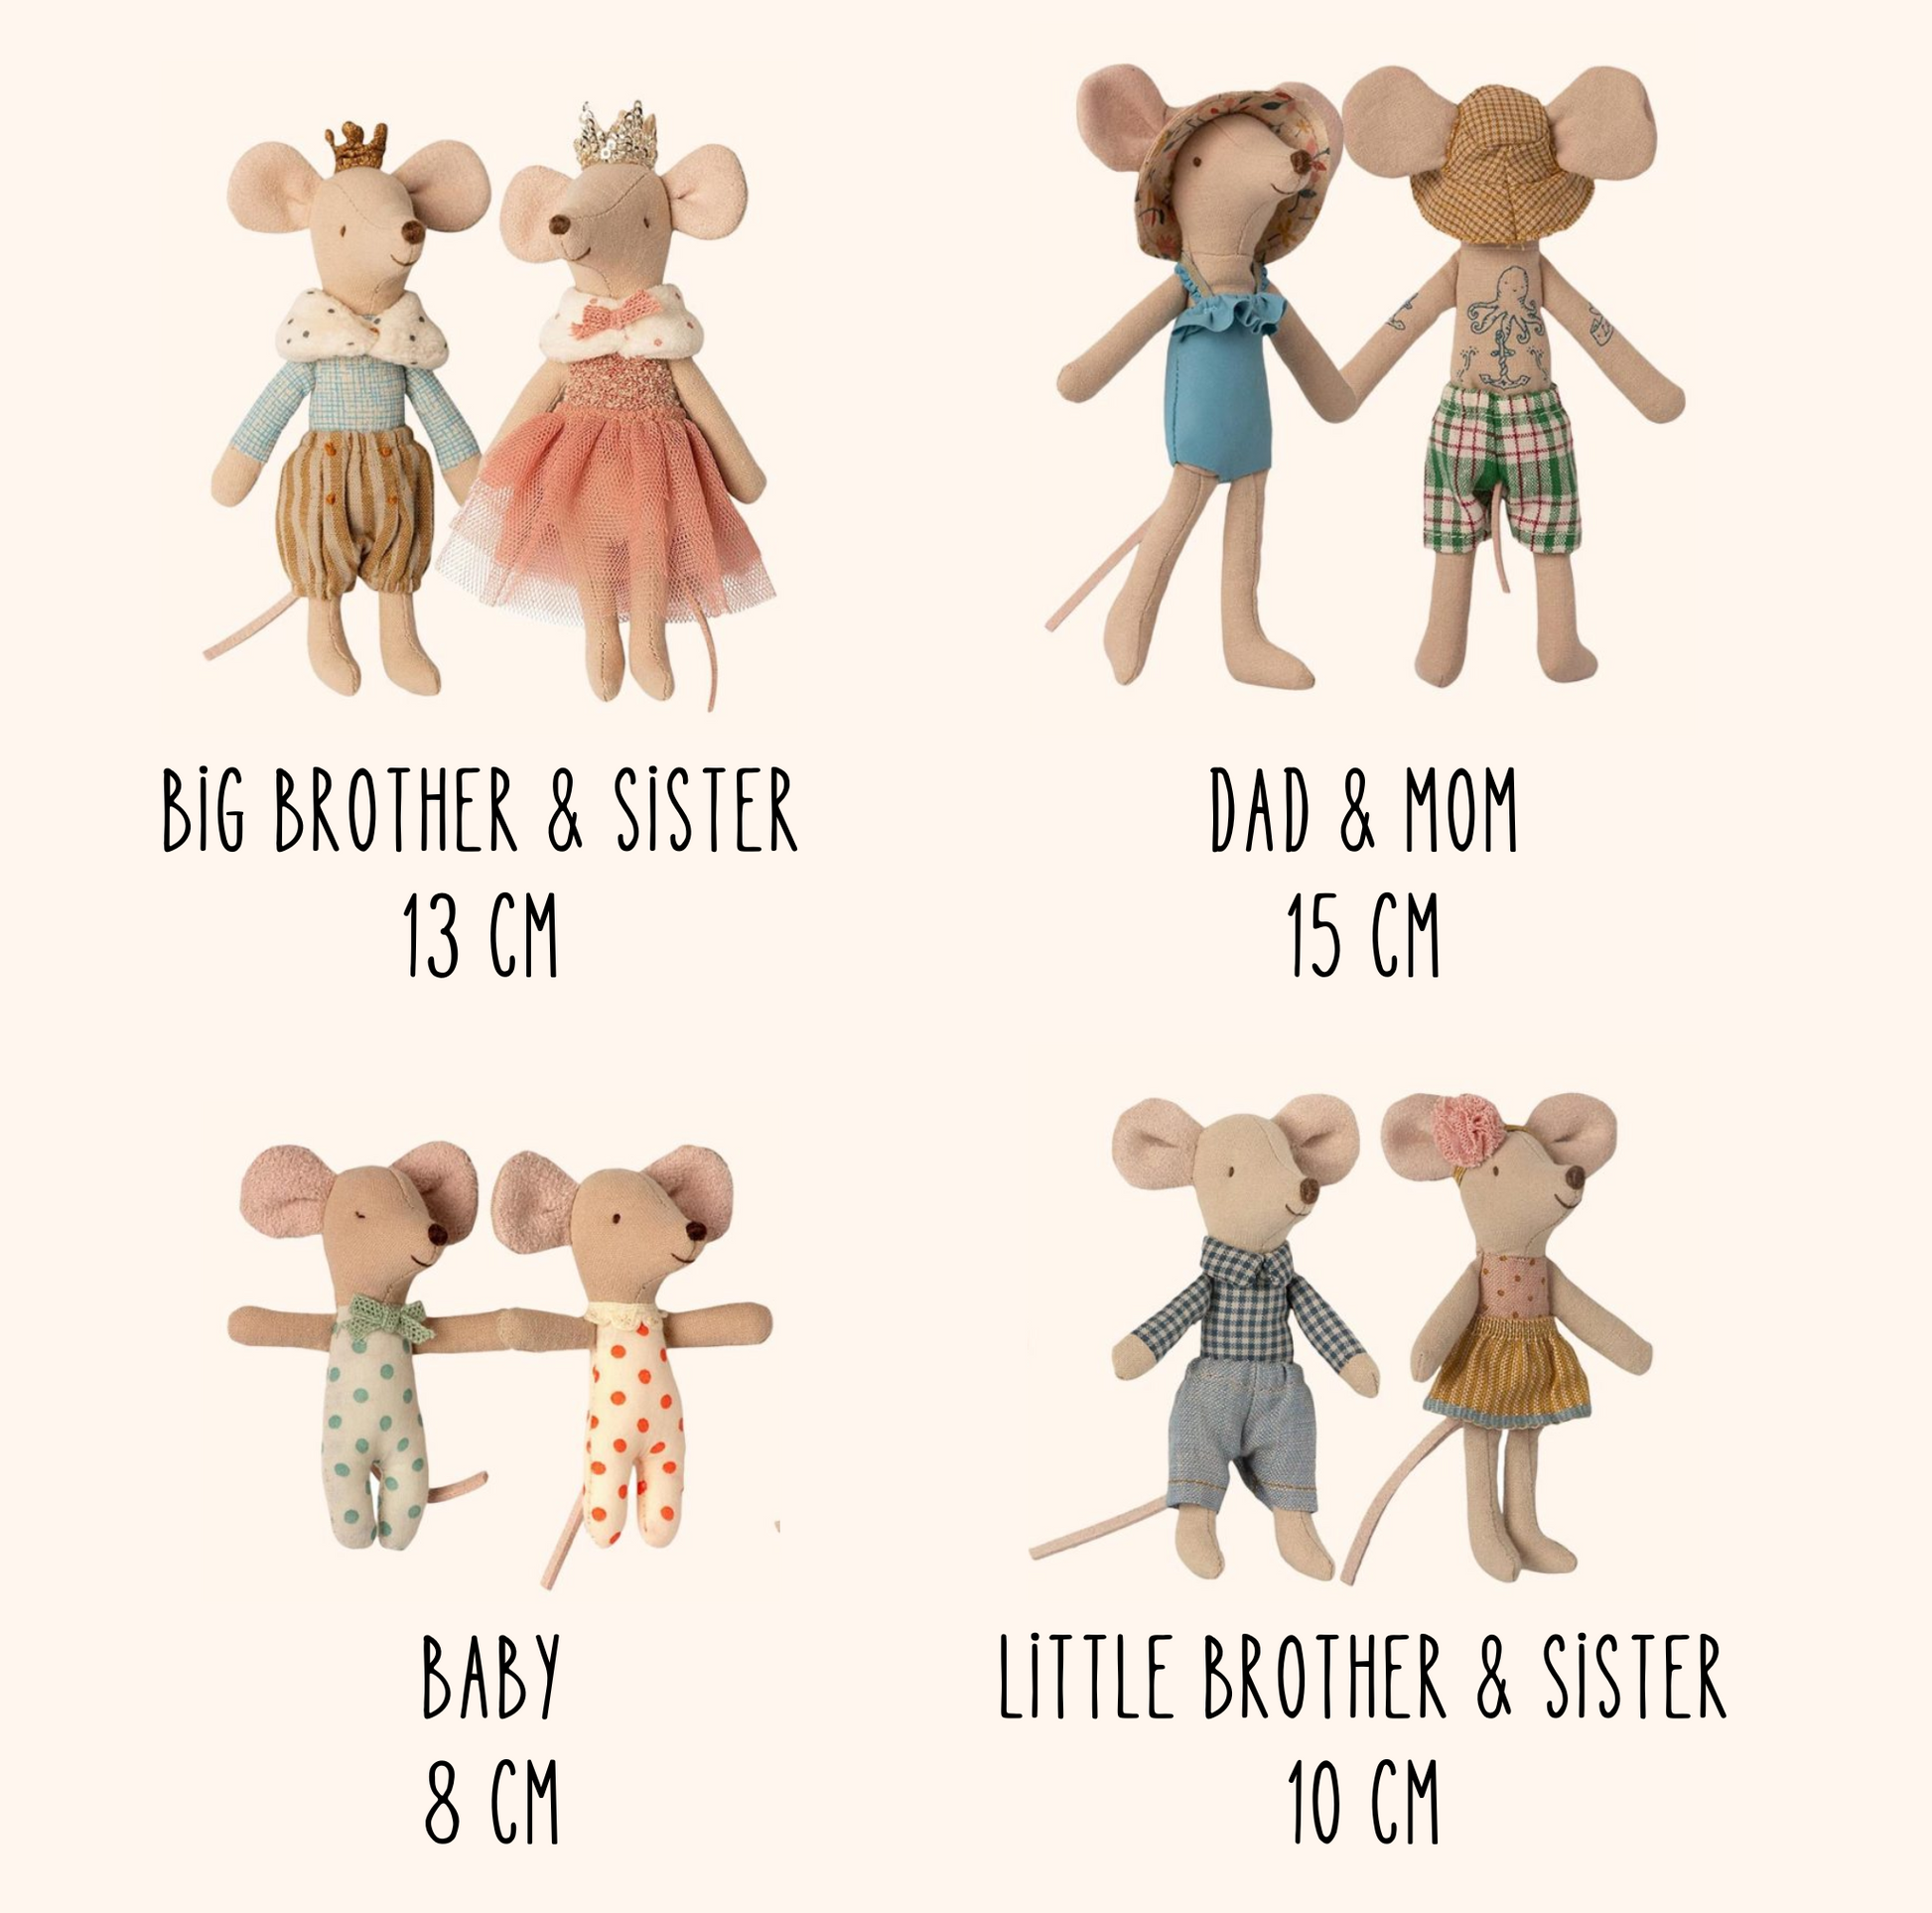 Maileg Clothes and Bag for Big Sister Mouse, Old Rose (8242568167711)